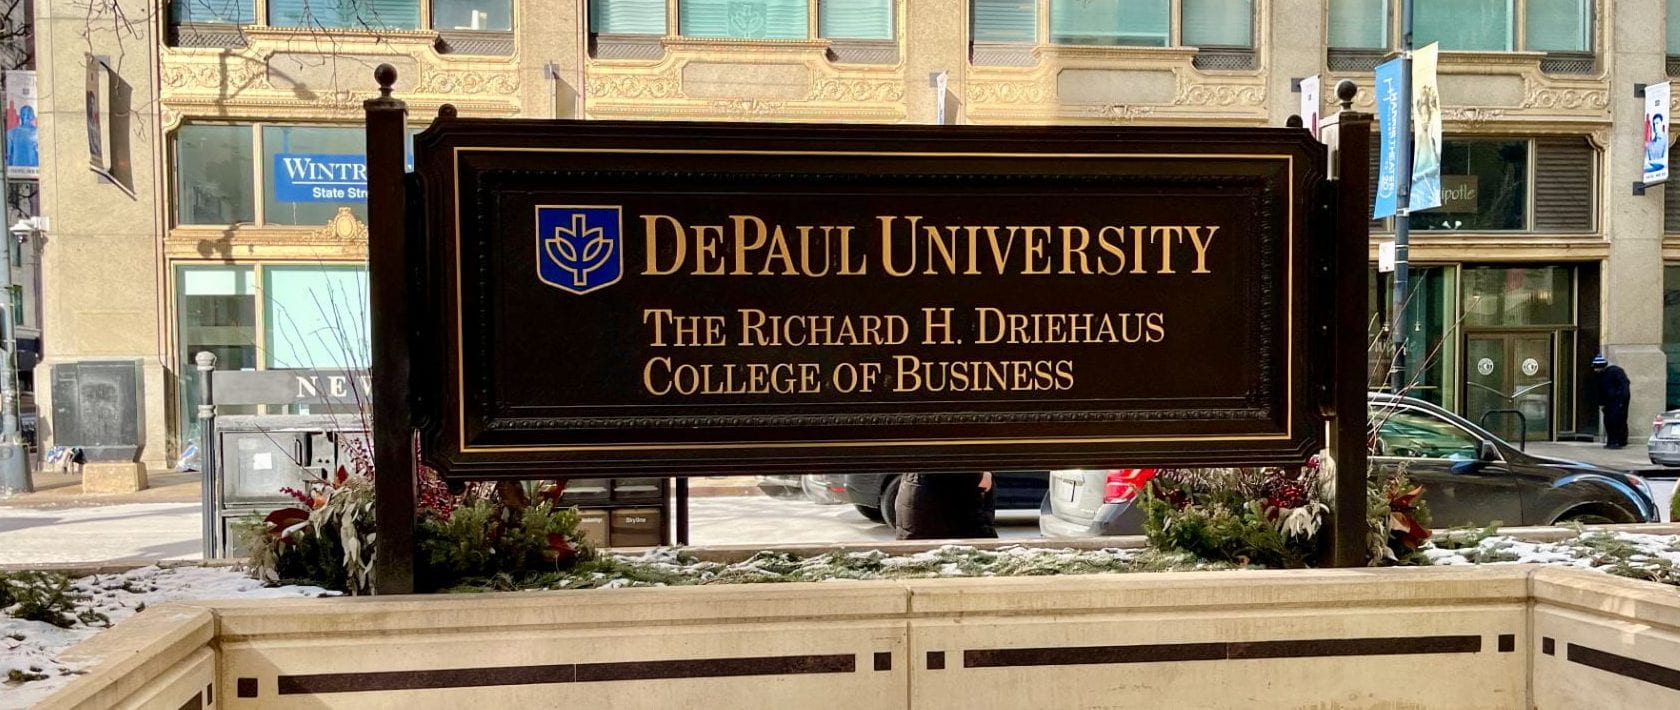 A black sign outside with snow on the ground with the words “DePaul University” “The Richard H. Driehaus College of Business” in blue and gold colors.